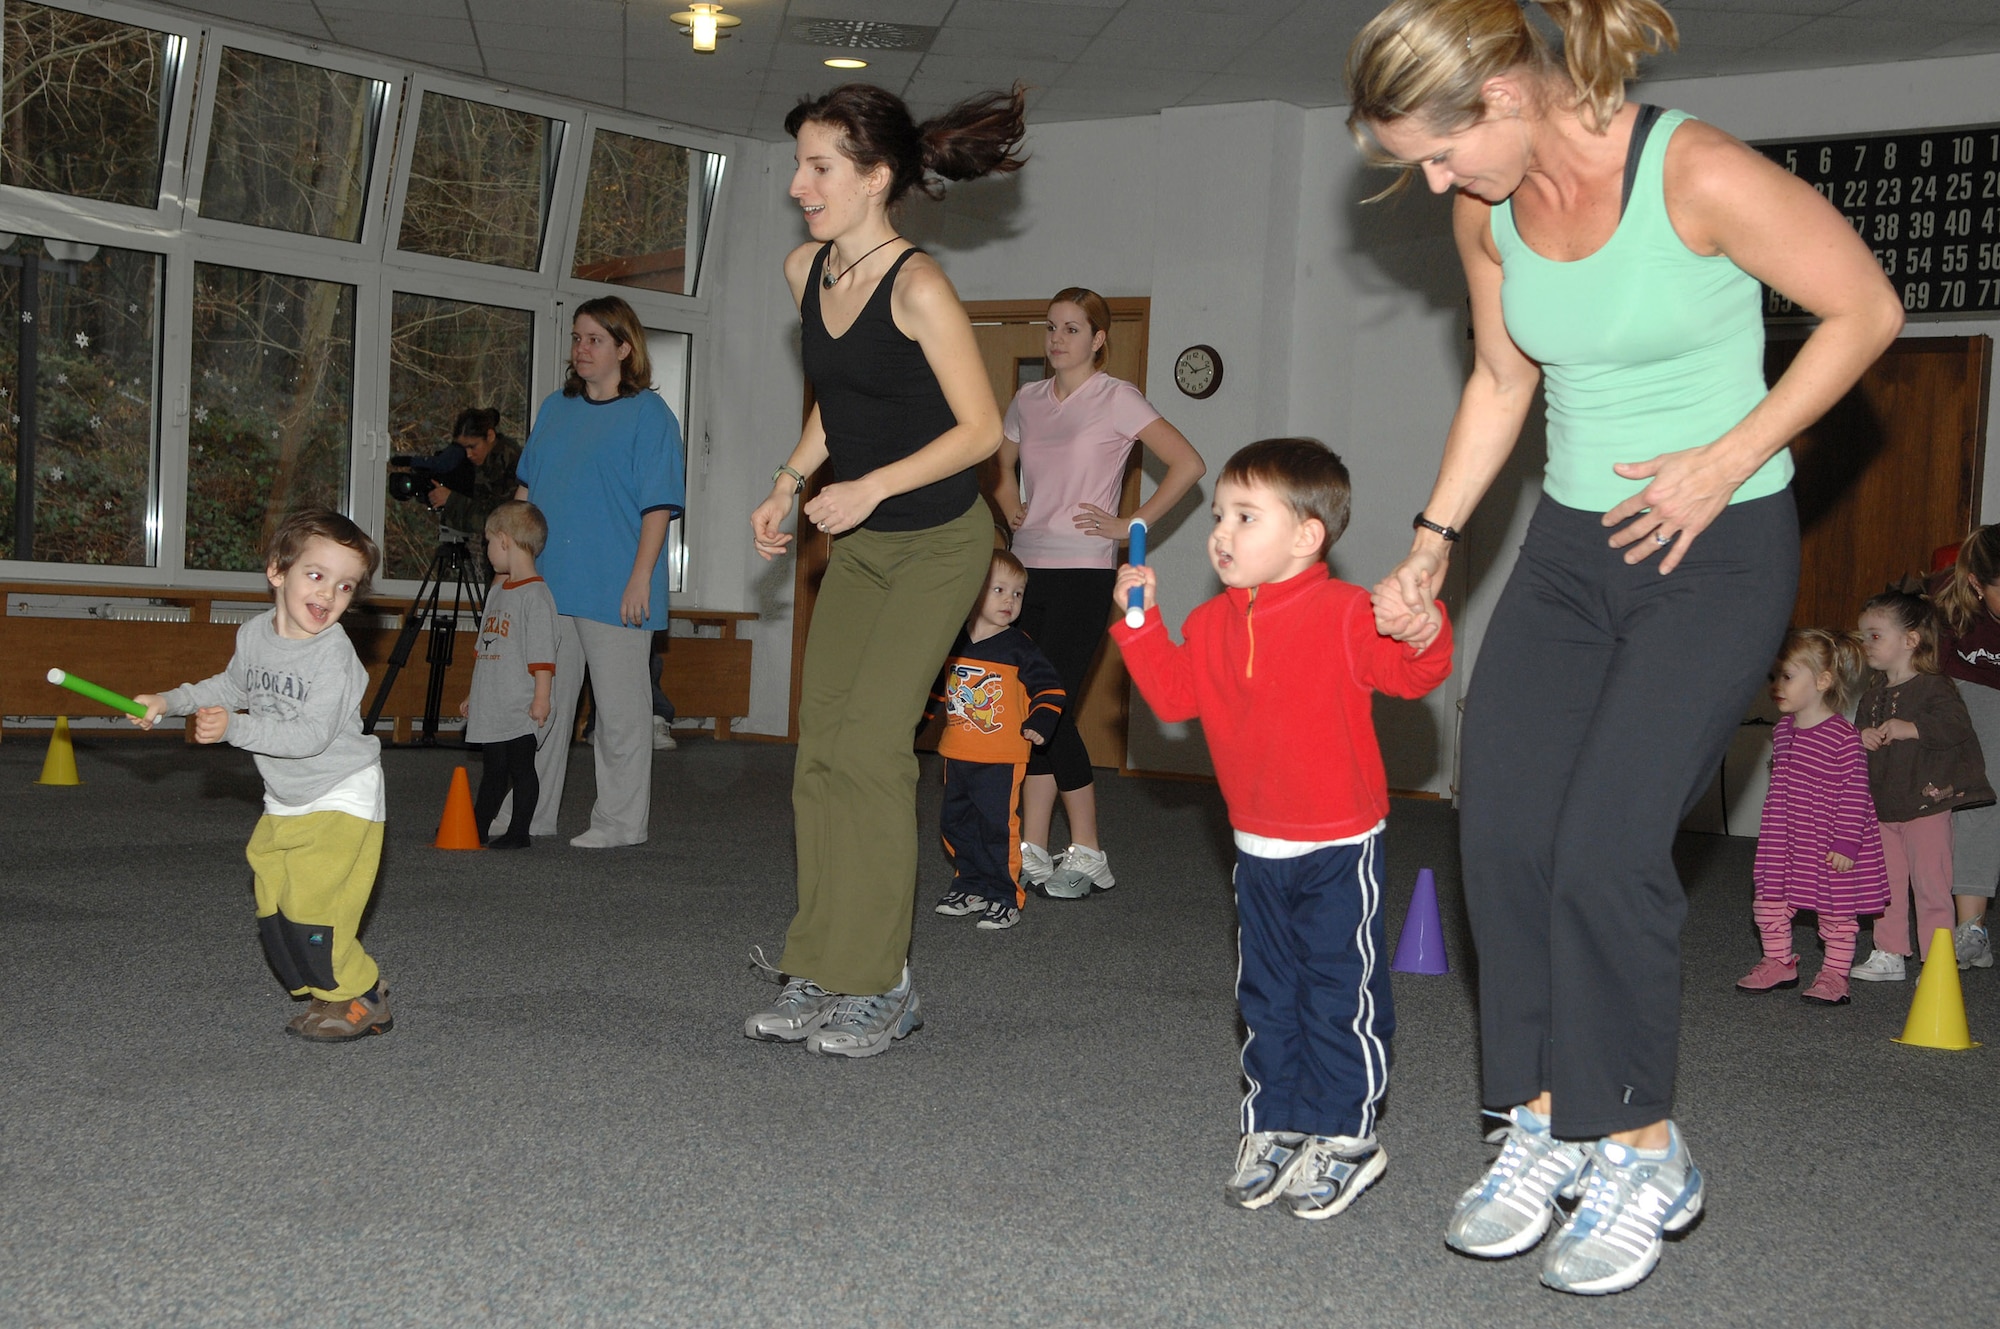 Renee Champagne, (right), does a fitness activity with her son, during the Mommy and Me Yoga and Fitness class, Jan.18, at the Vogelweh Community Center. Ms. Champagne is the instructor for the class. (U.S. Air Force photo/Senior Airman Megan M. Carrico) 